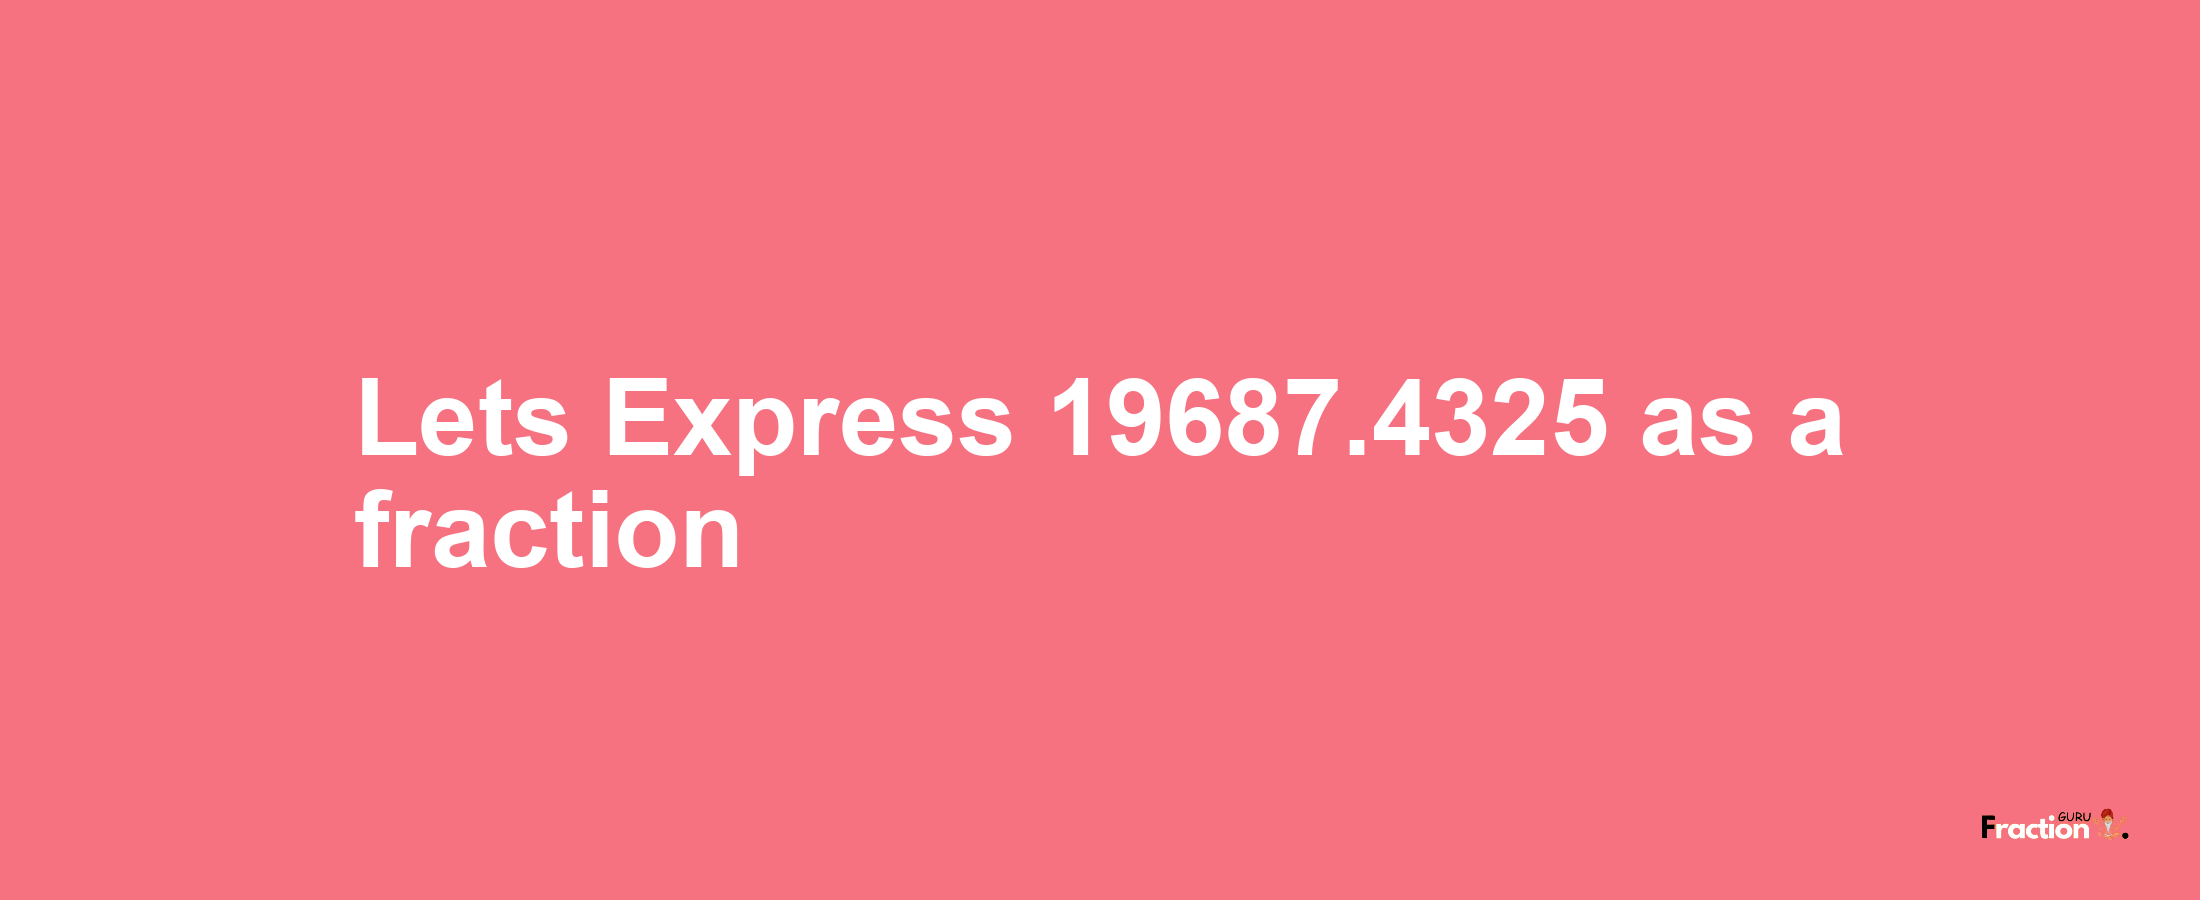 Lets Express 19687.4325 as afraction